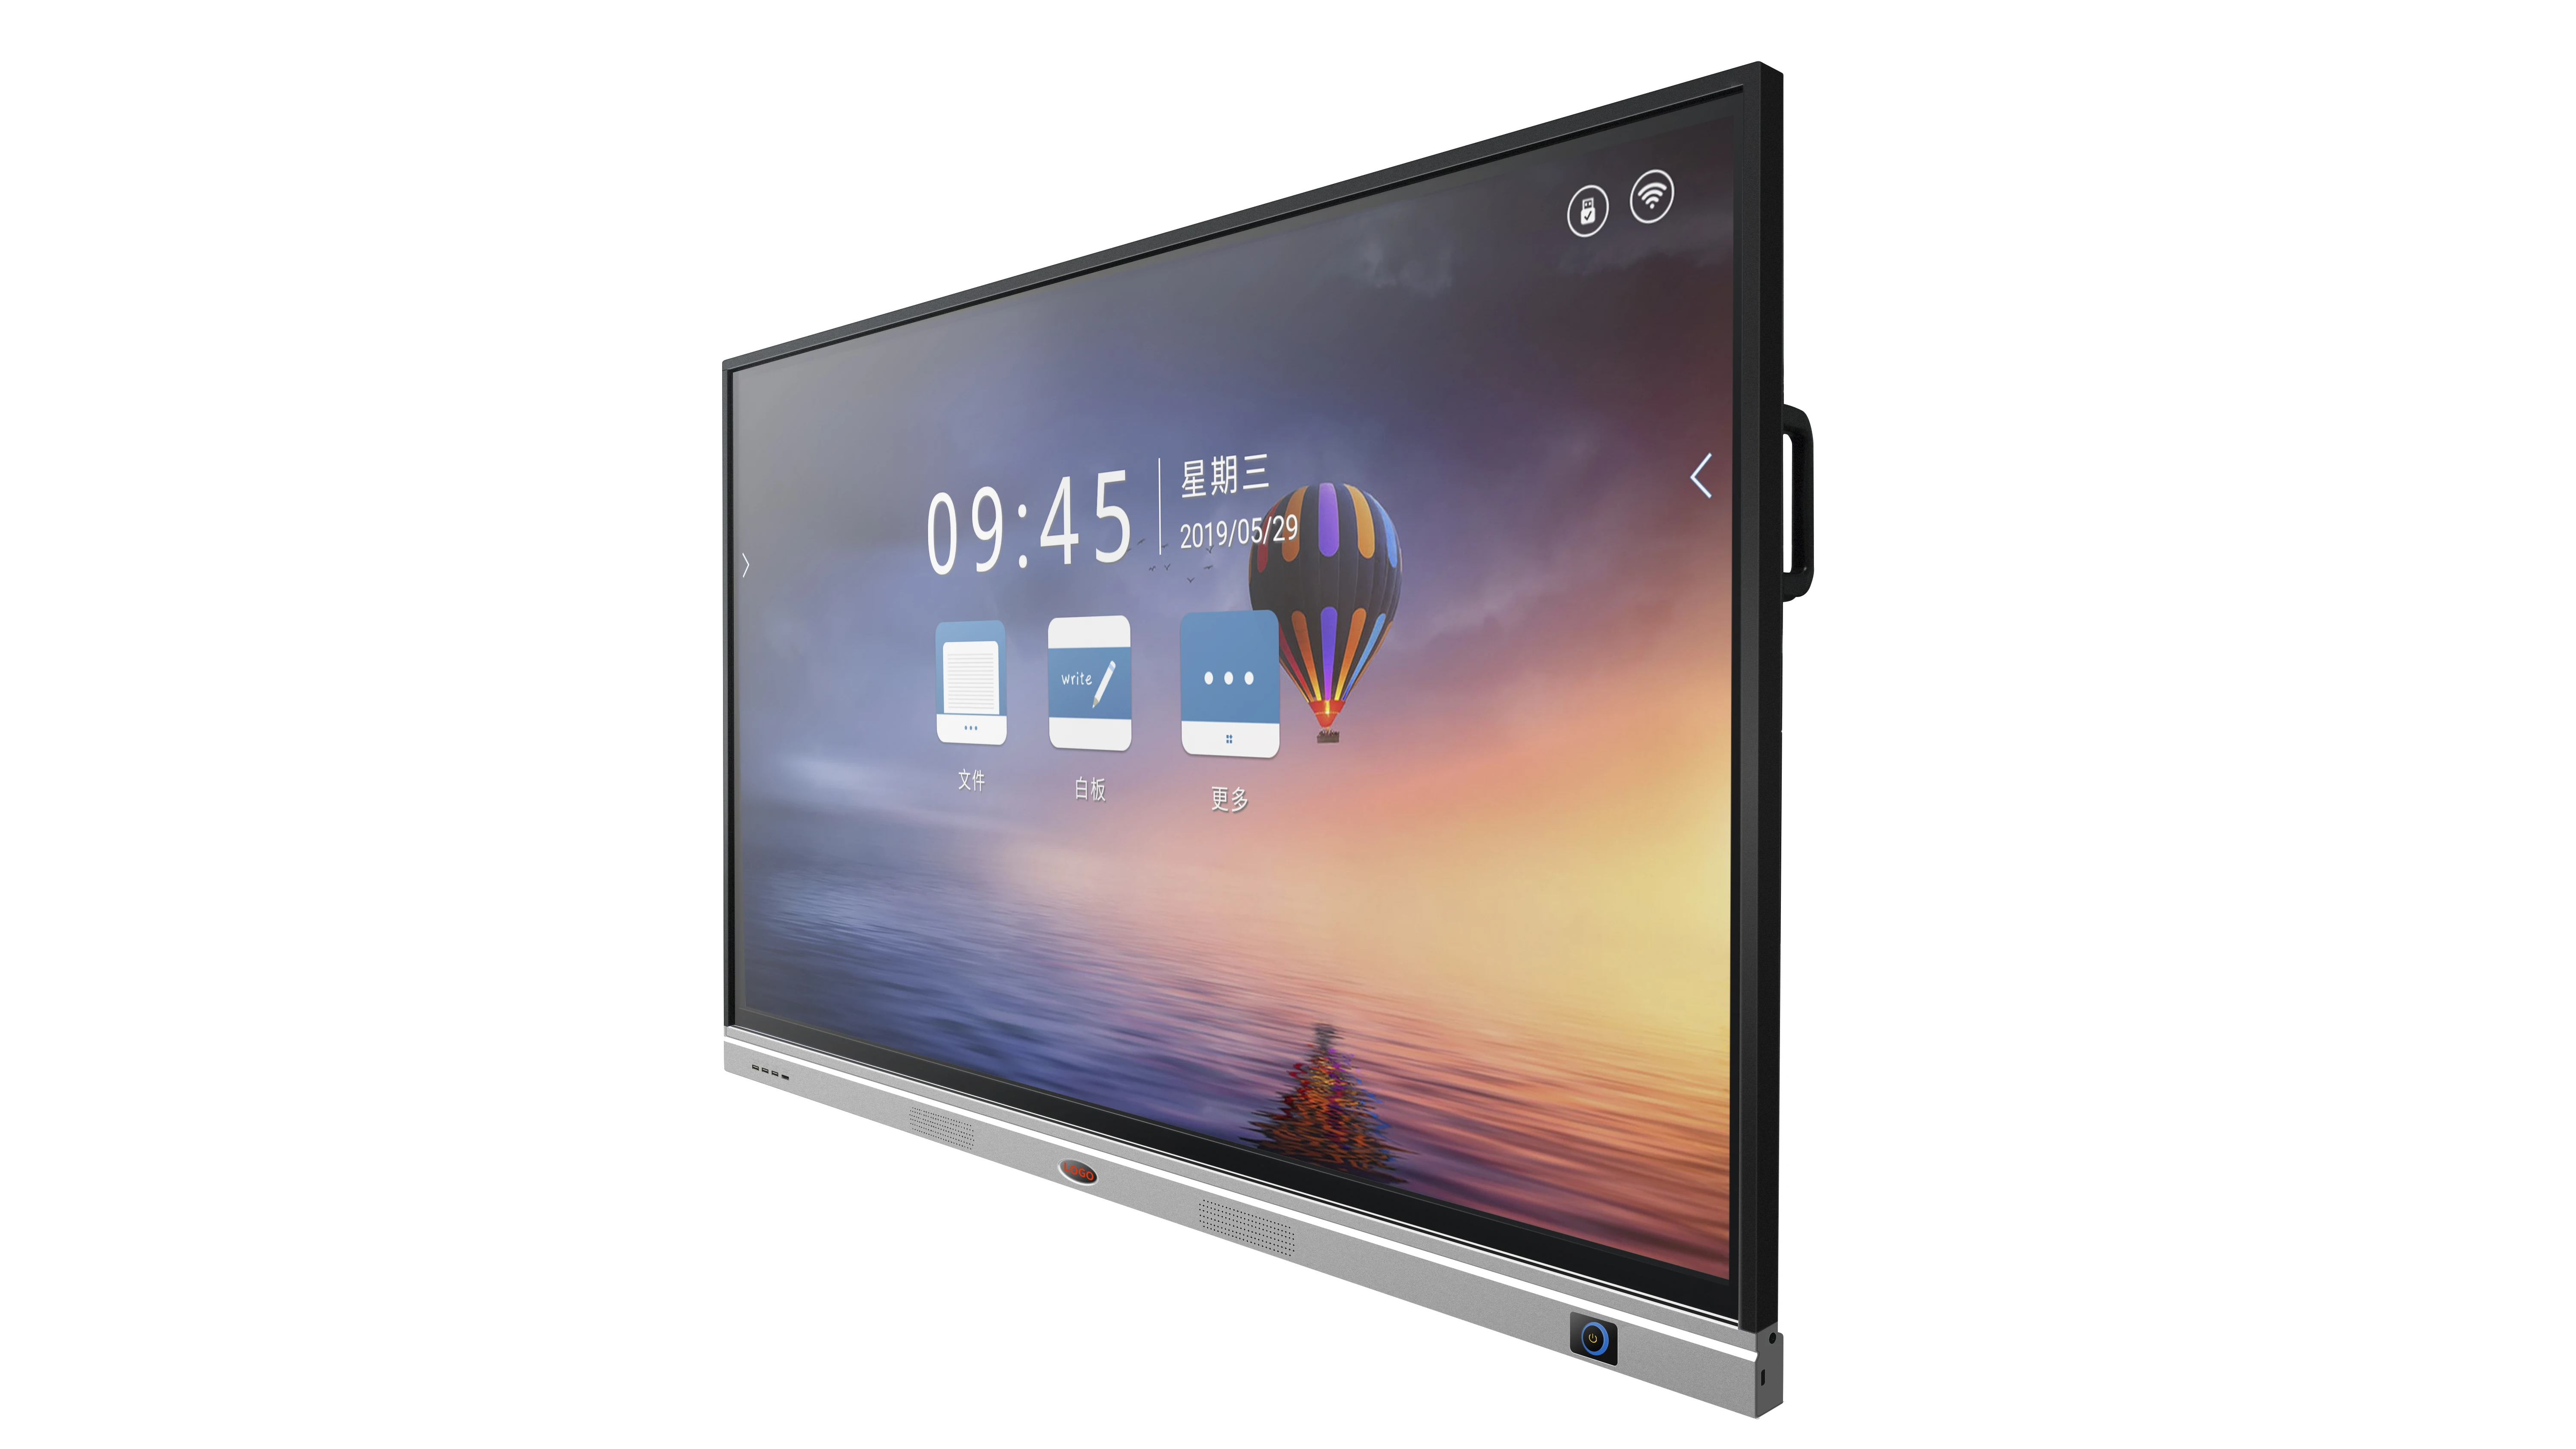 55 inch IPS Capacitive IR Multi Touch Screen Frame Smart TV for Classroom, School, Conference